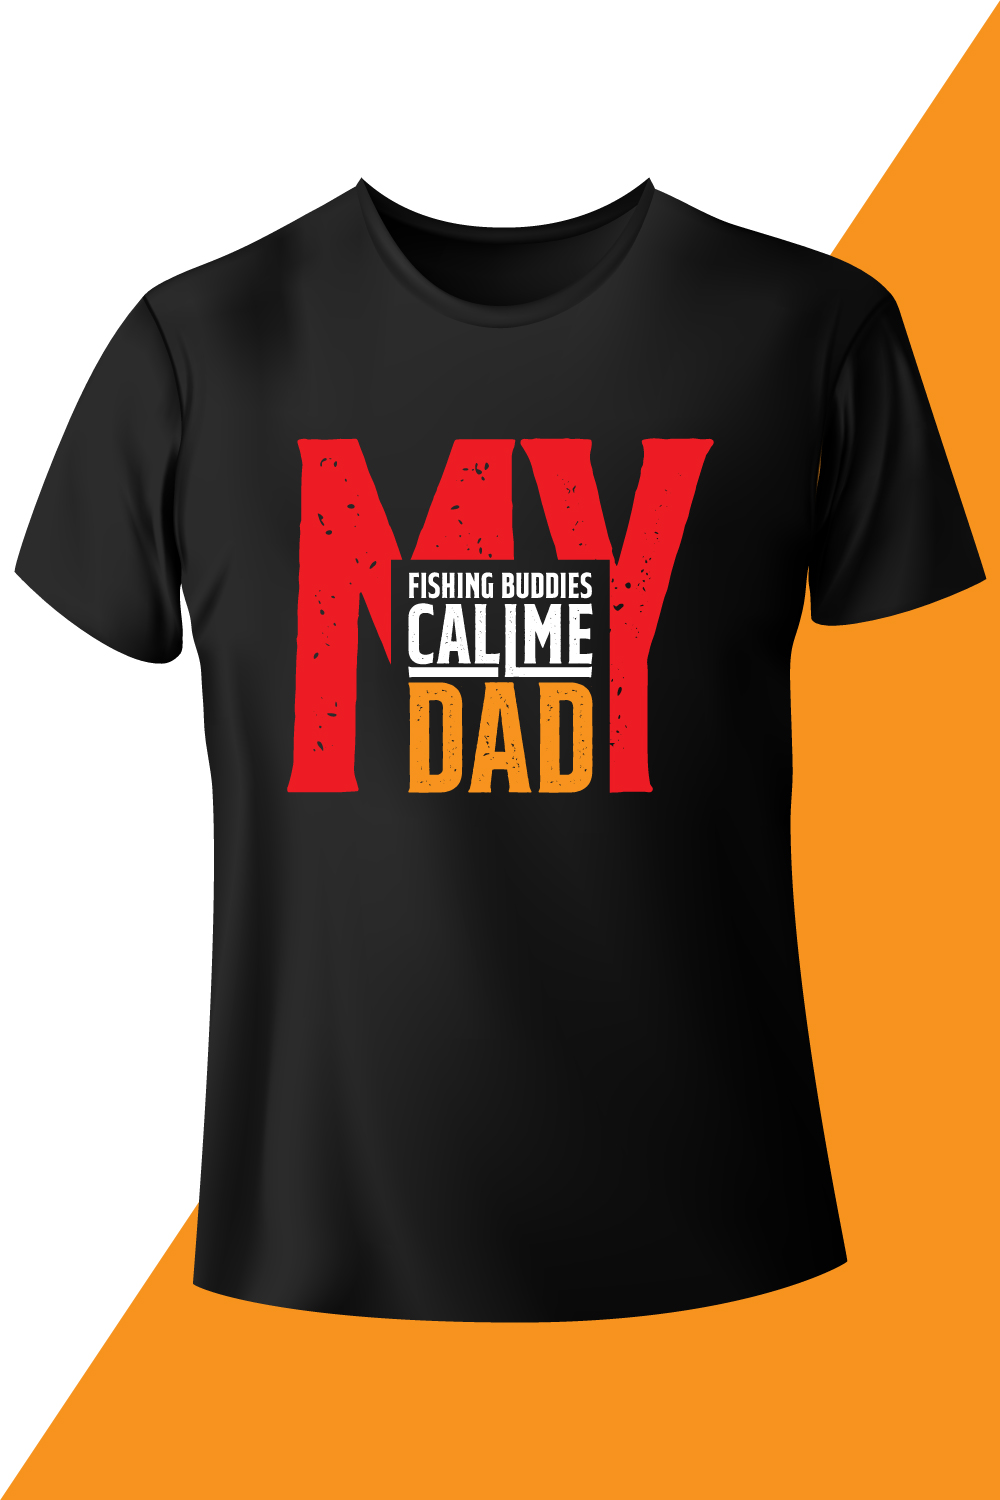 Image of a black t-shirt with a beautiful print My fishing buddies call me dad.